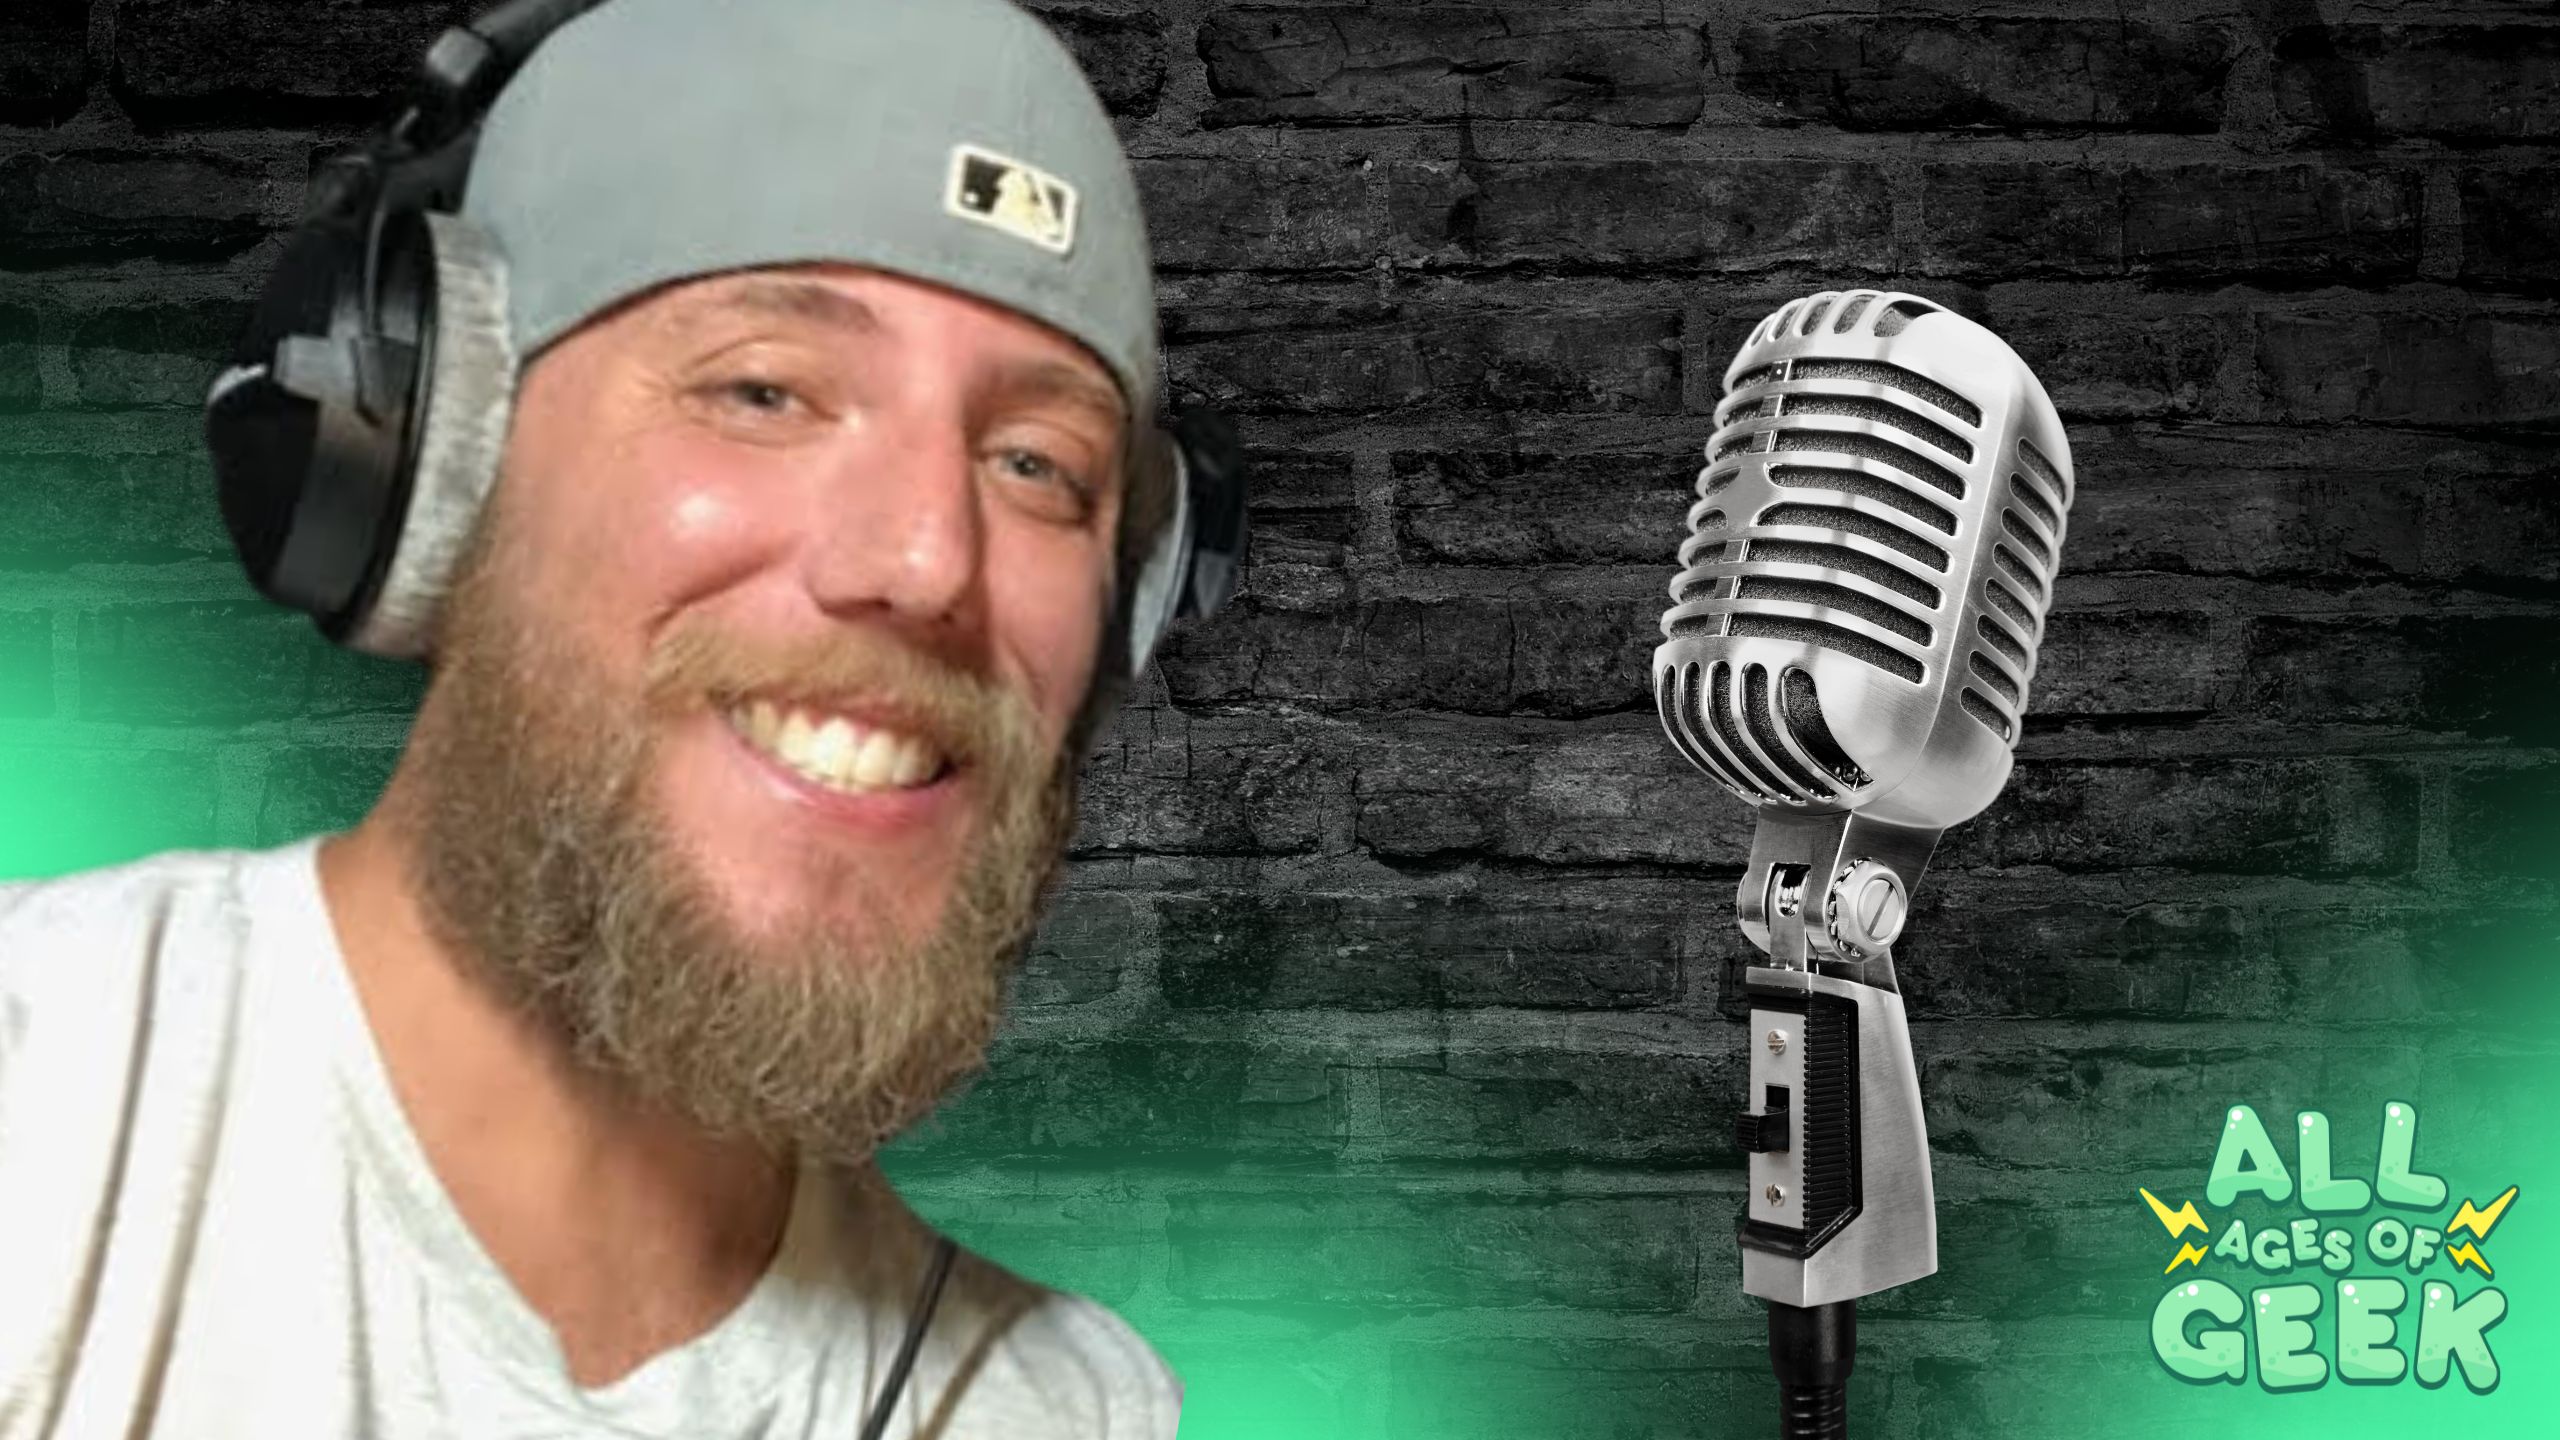 image of andy mack smiling next to a mic on a brick background all ages of geek logo on bottom right